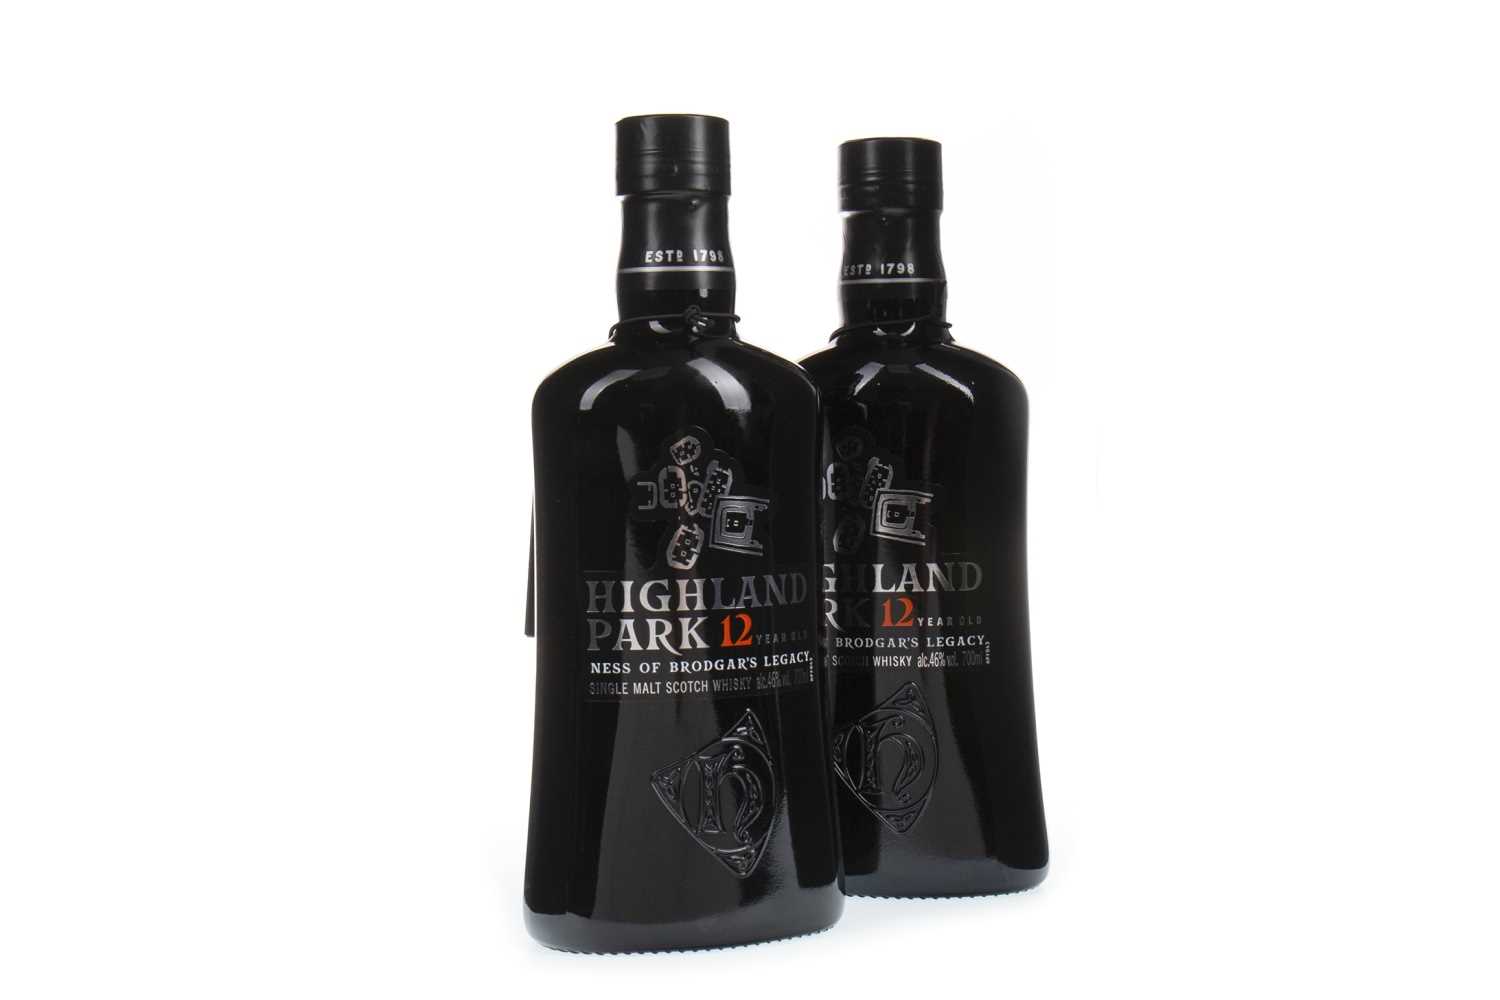 Lot 302 - TWO BOTTLES OF HIGHLAND PARK NESS OF BRODGAR'S LEGACY 12 YEARS OLD